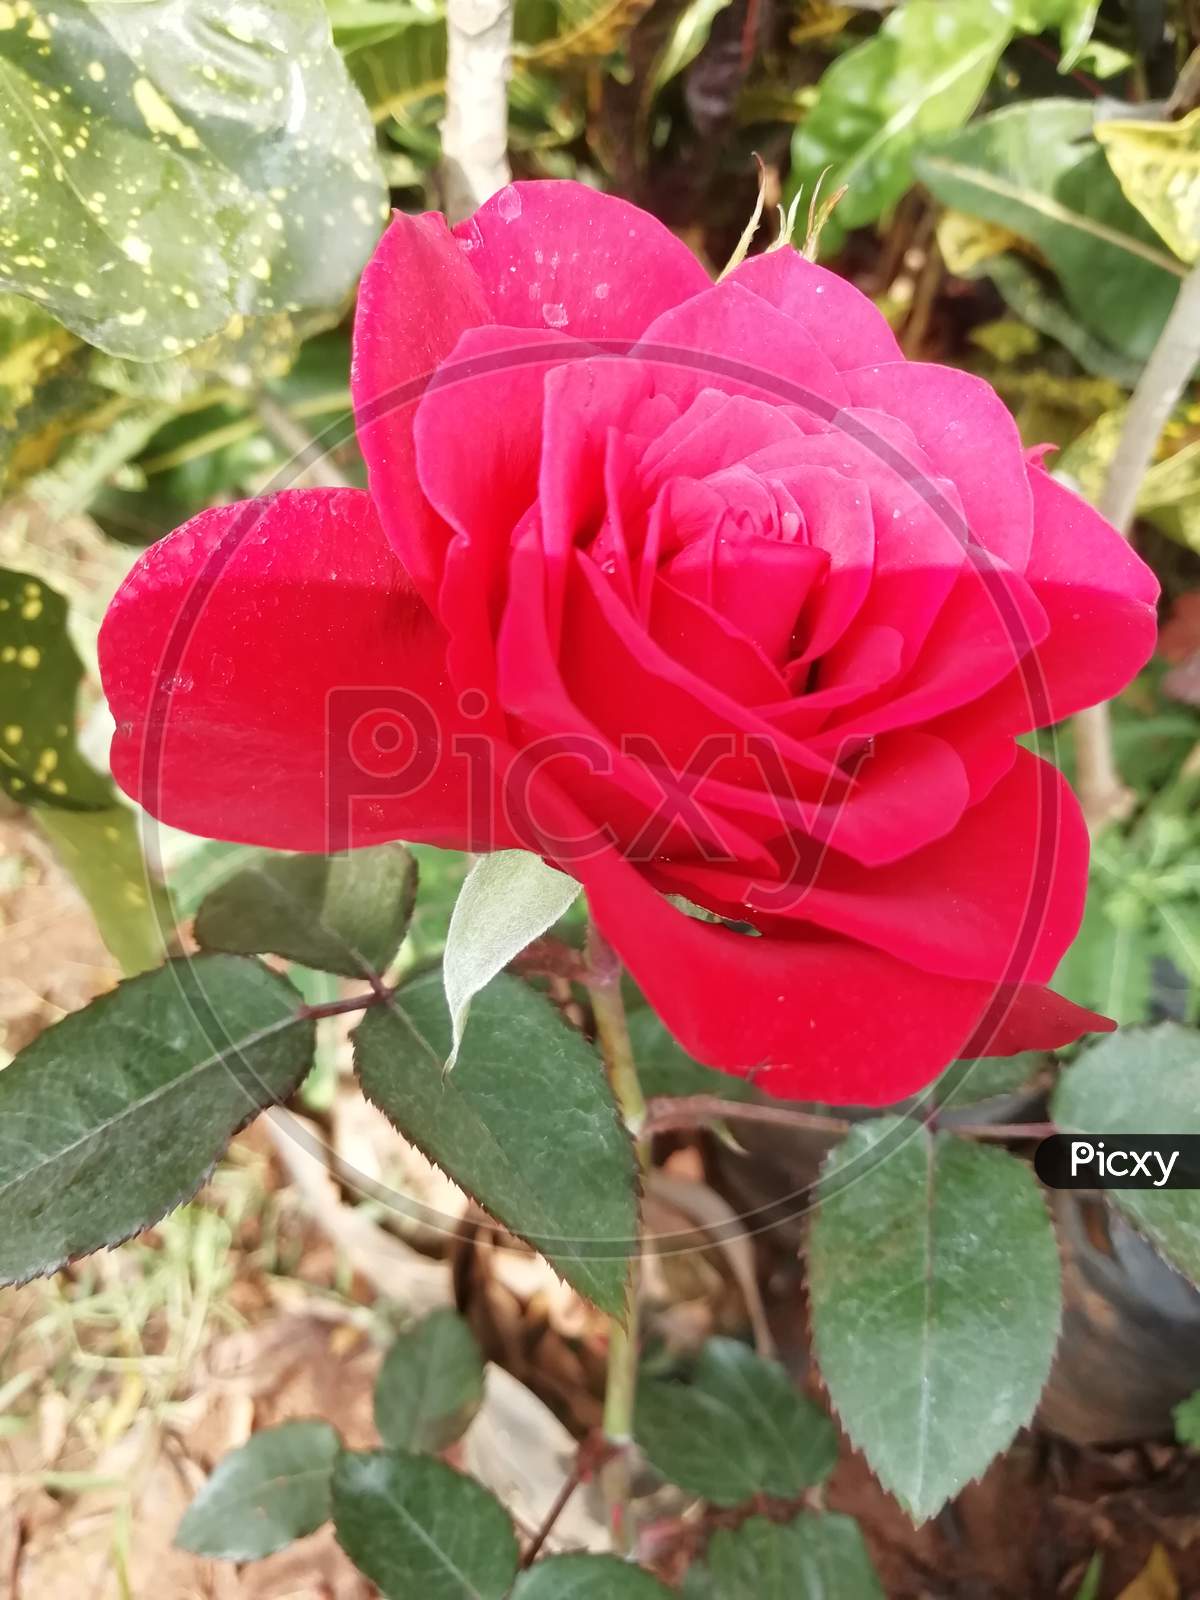 Rose flower in a close up view